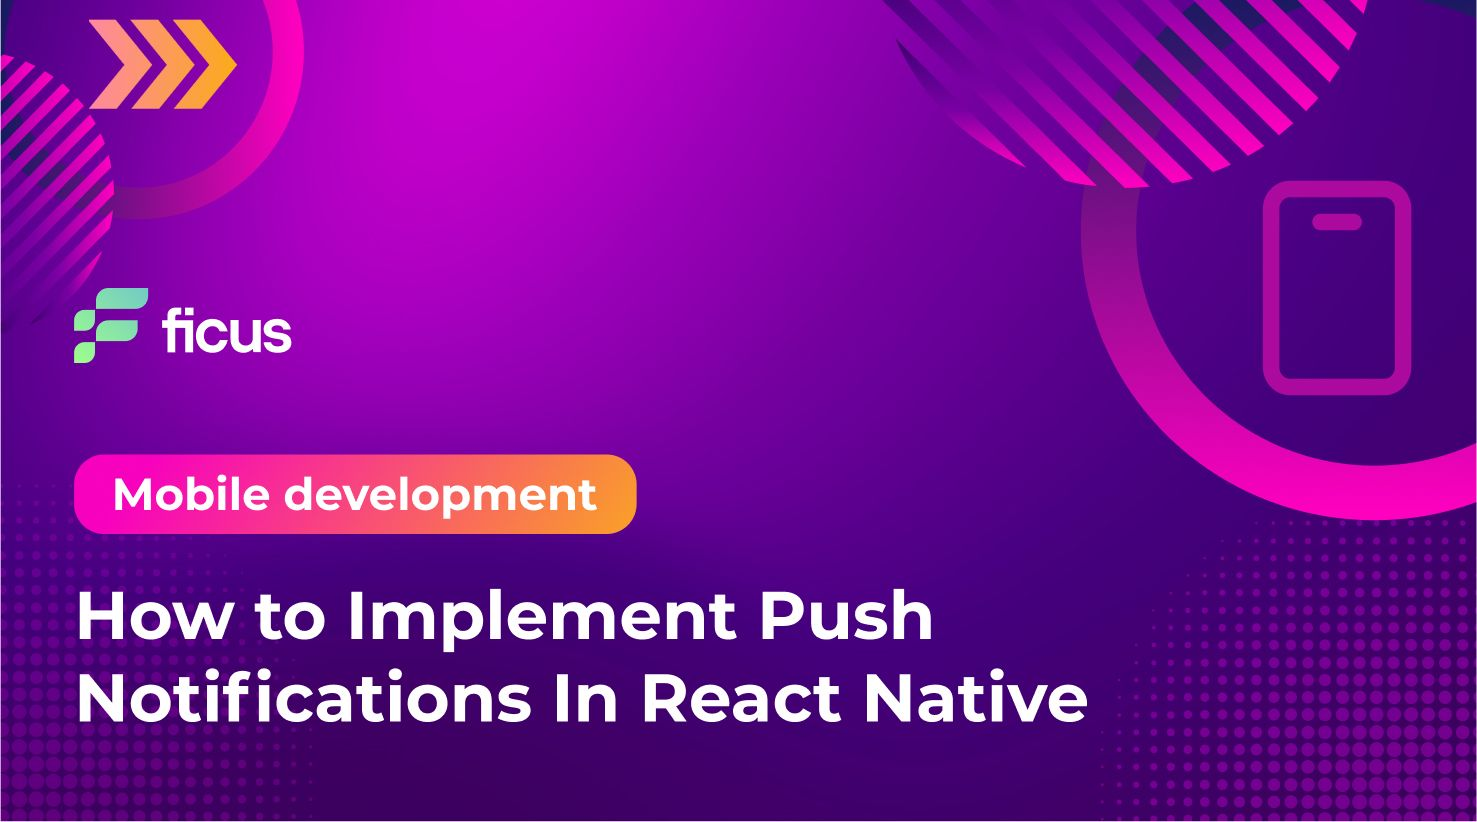 How to Implement Push Notifications In React Native